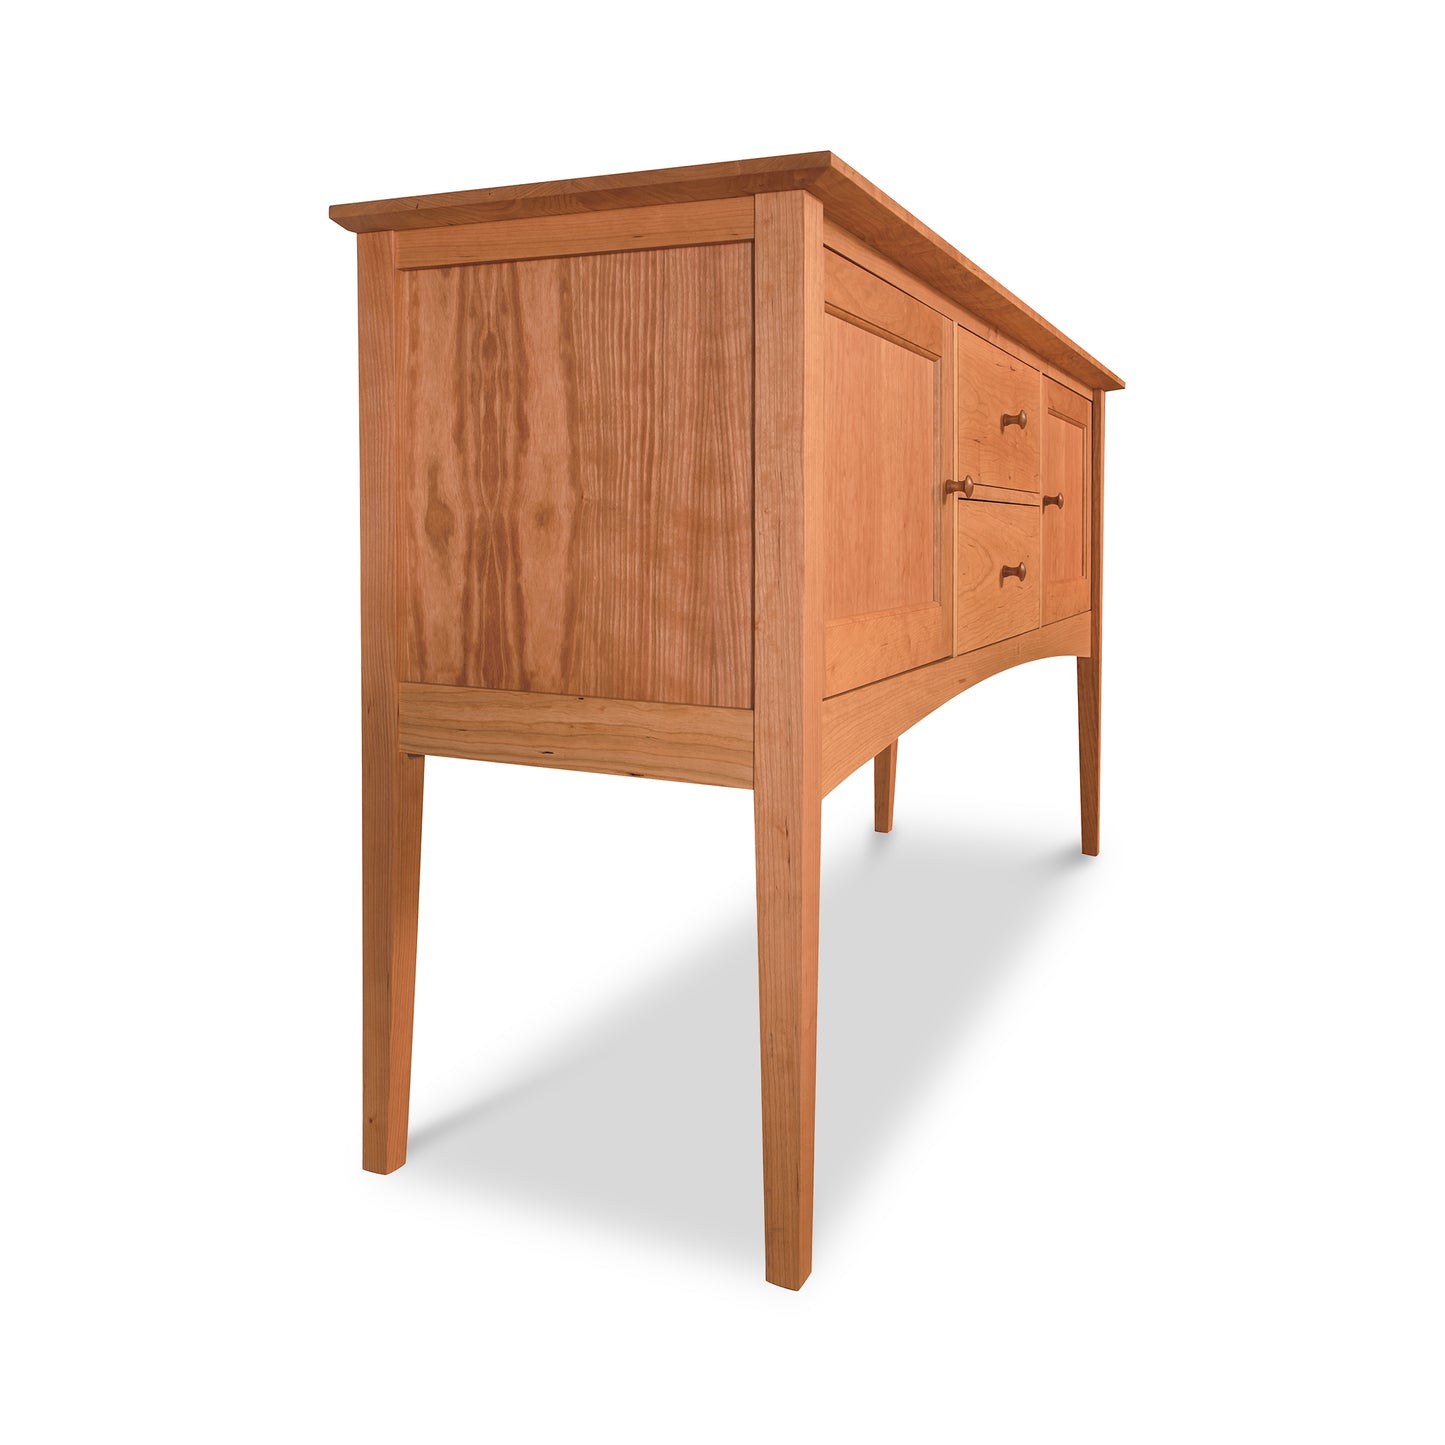 A Maple Corner Woodworks American Shaker Huntboard with a simple design, featuring one cabinet and two small drawers, set against a white background. The desk has a smooth finish and angled legs, crafted in solid hardwood construction.